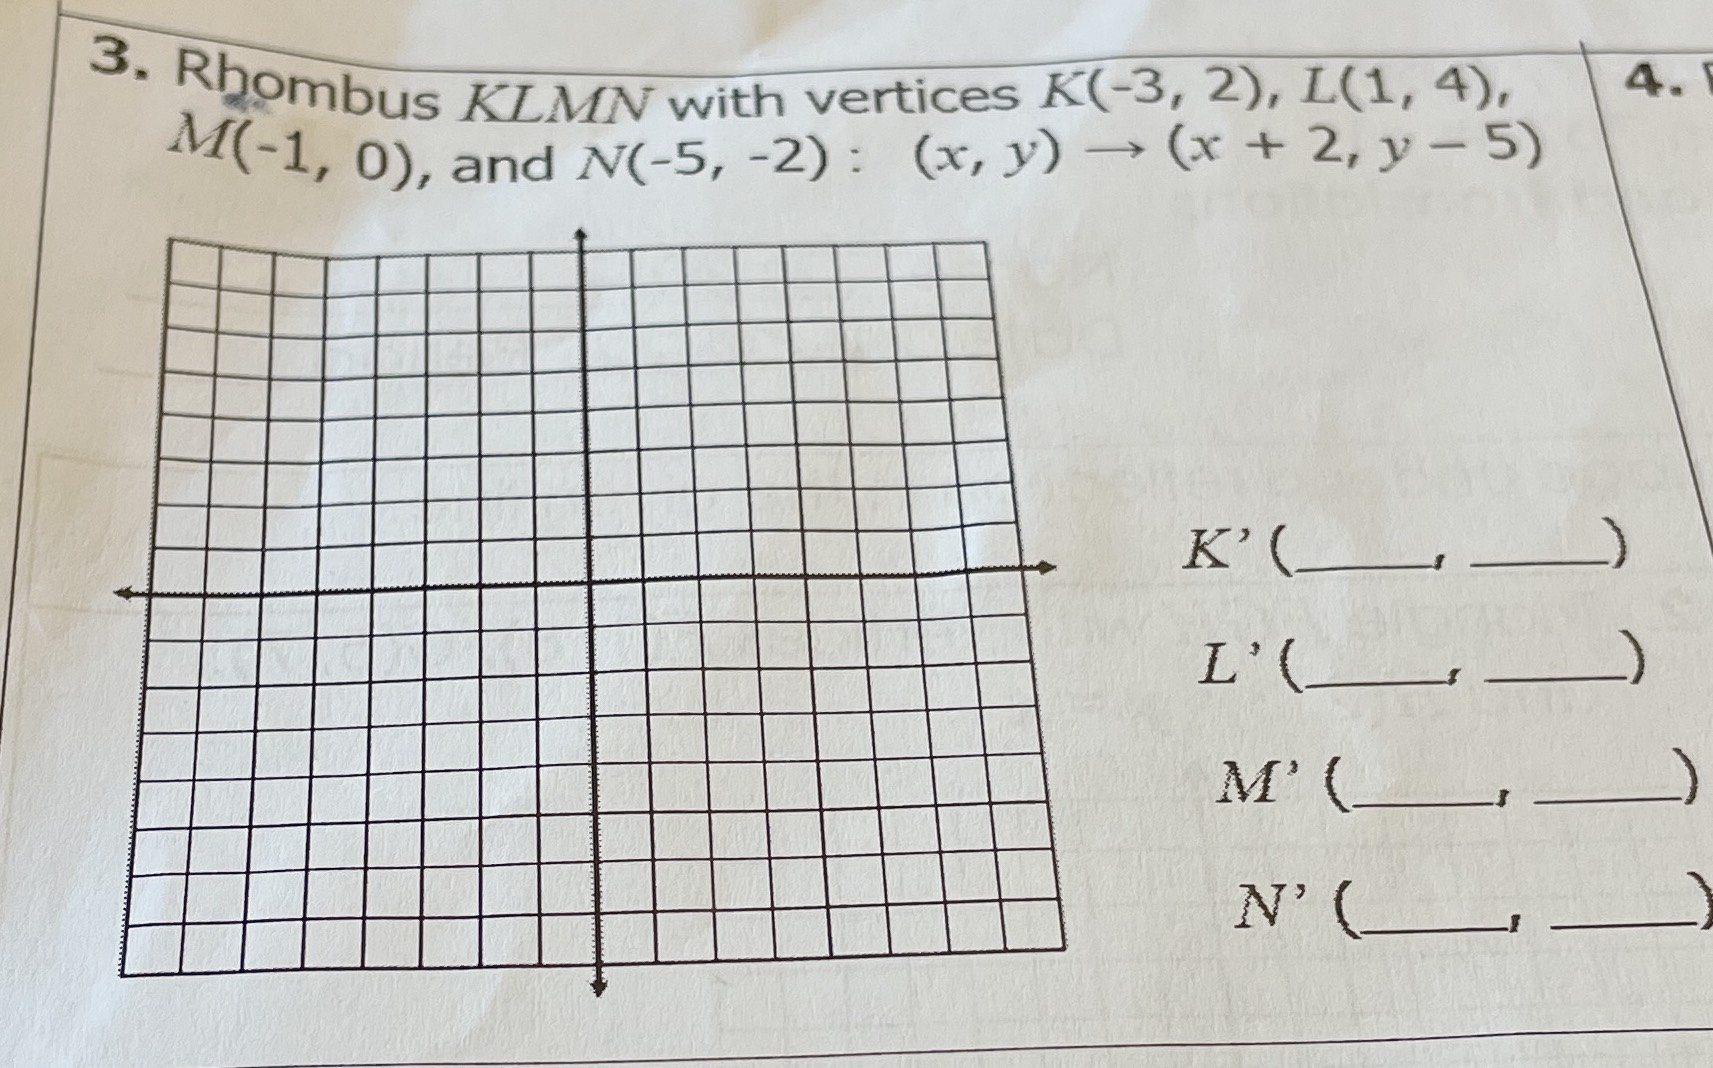 Rbombus \( K L M N \) with vertices \( K ( - 3,2 )...